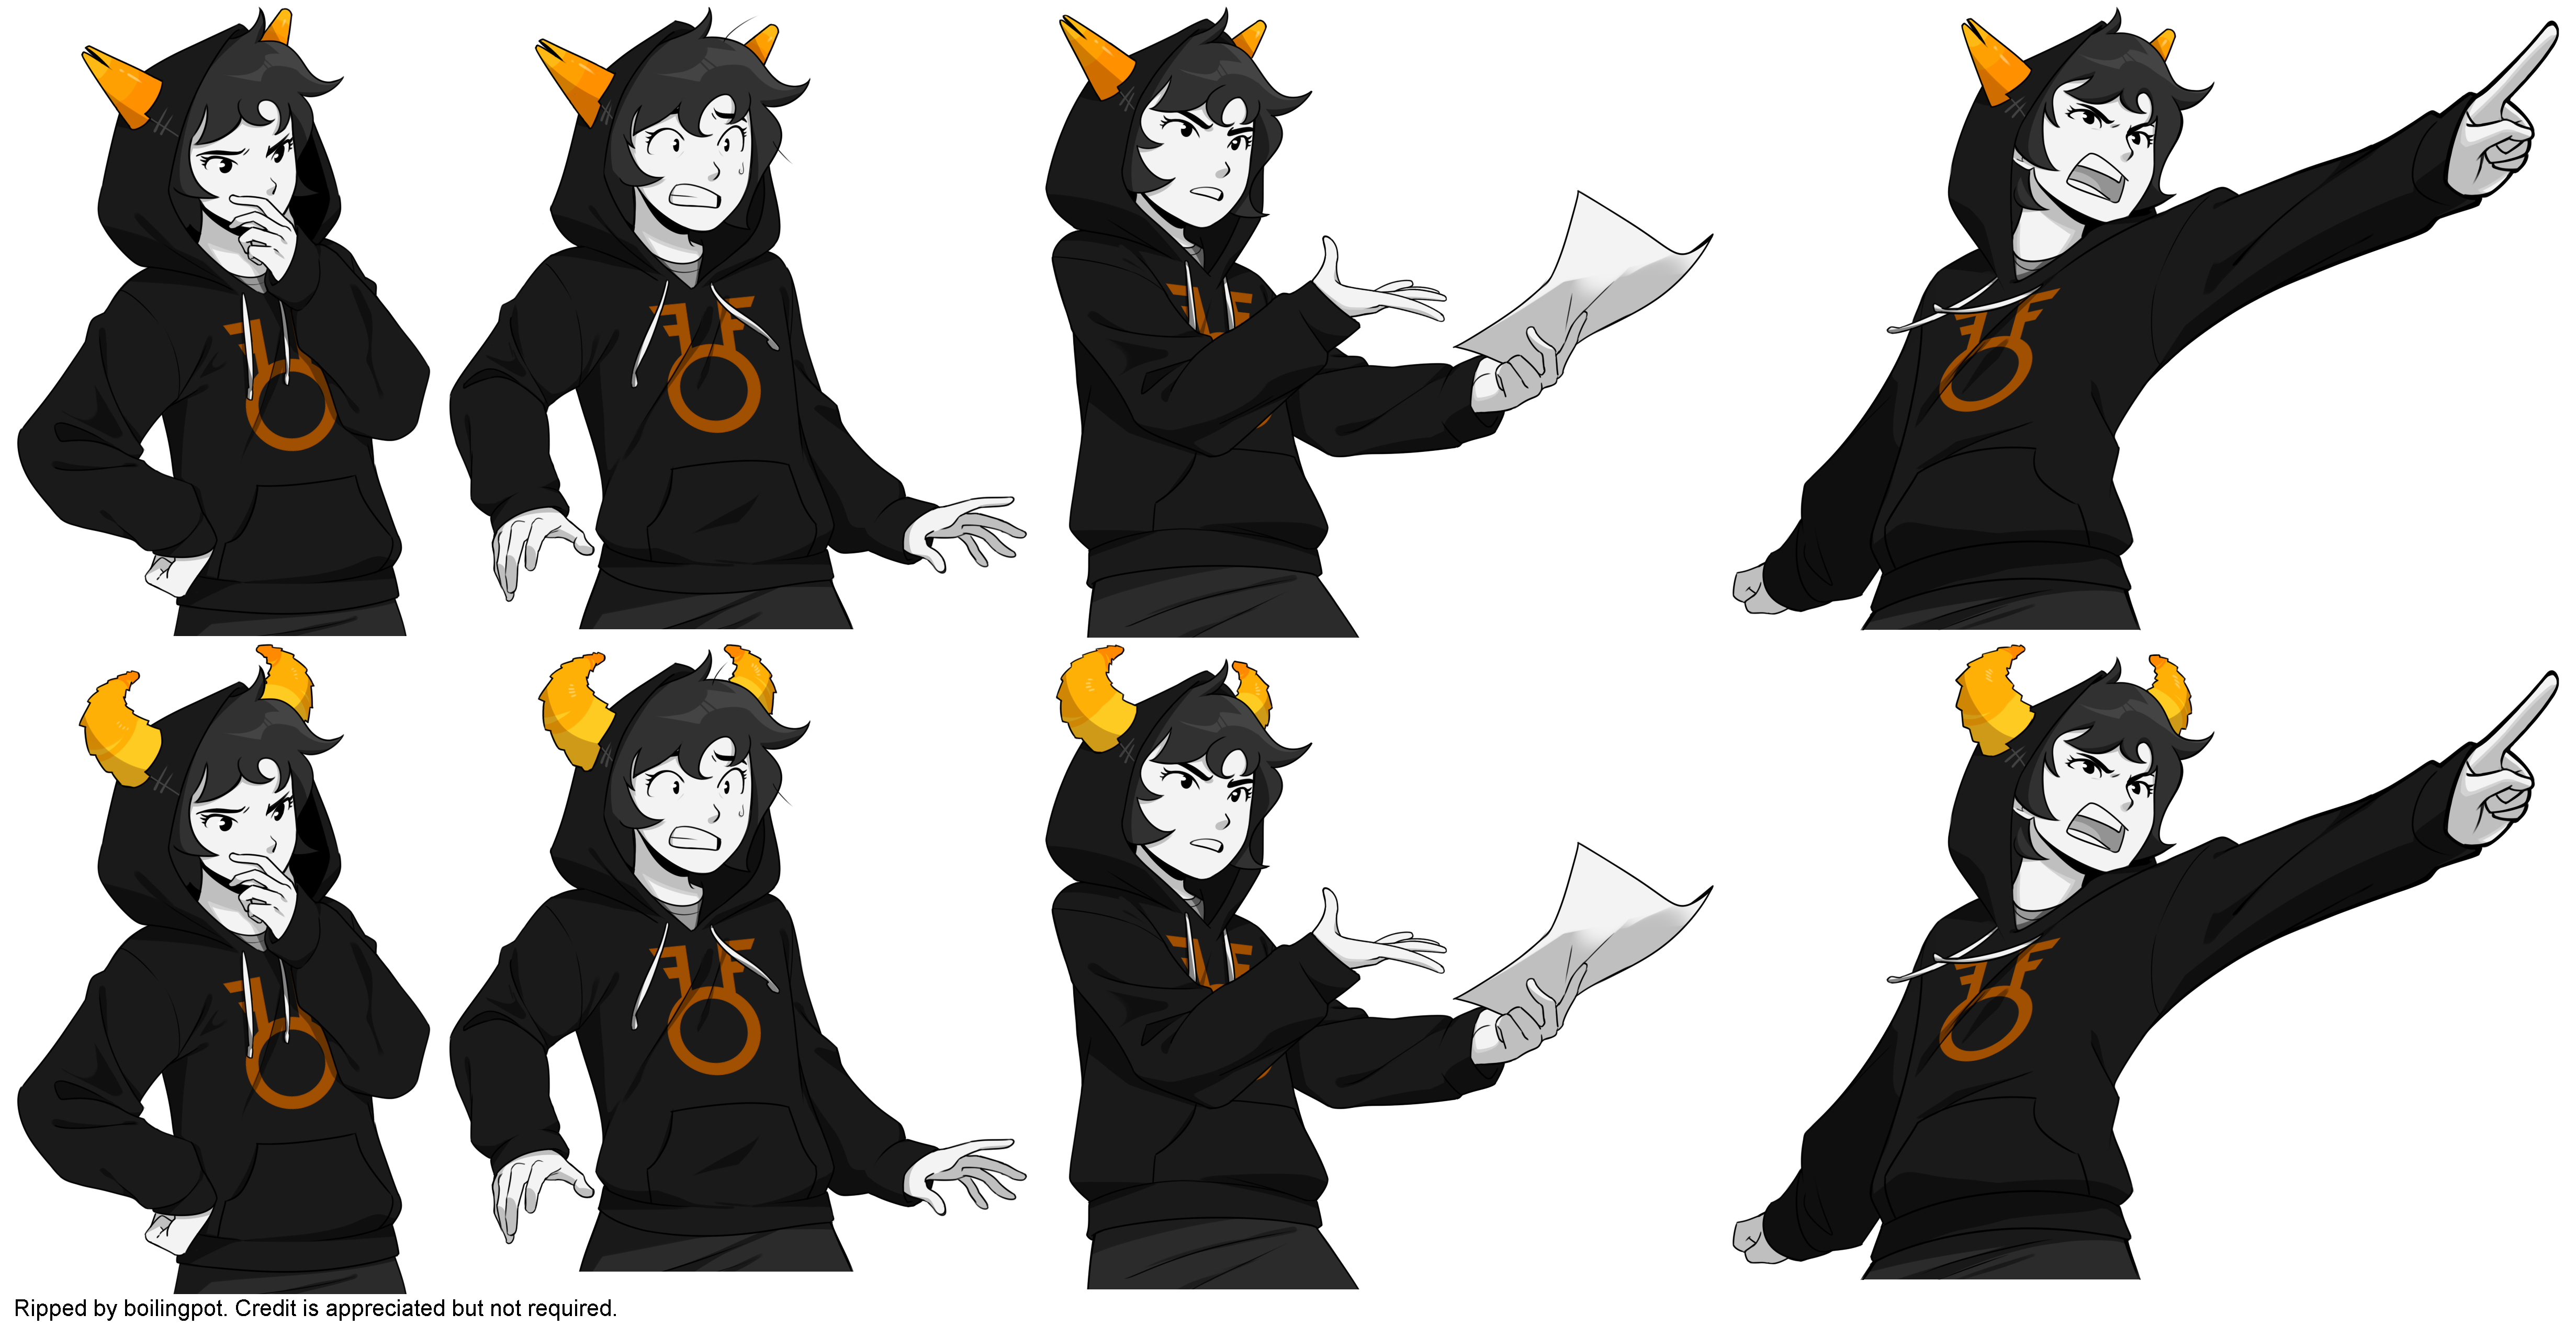 HIVESWAP: ACT 2 - Joey Claire